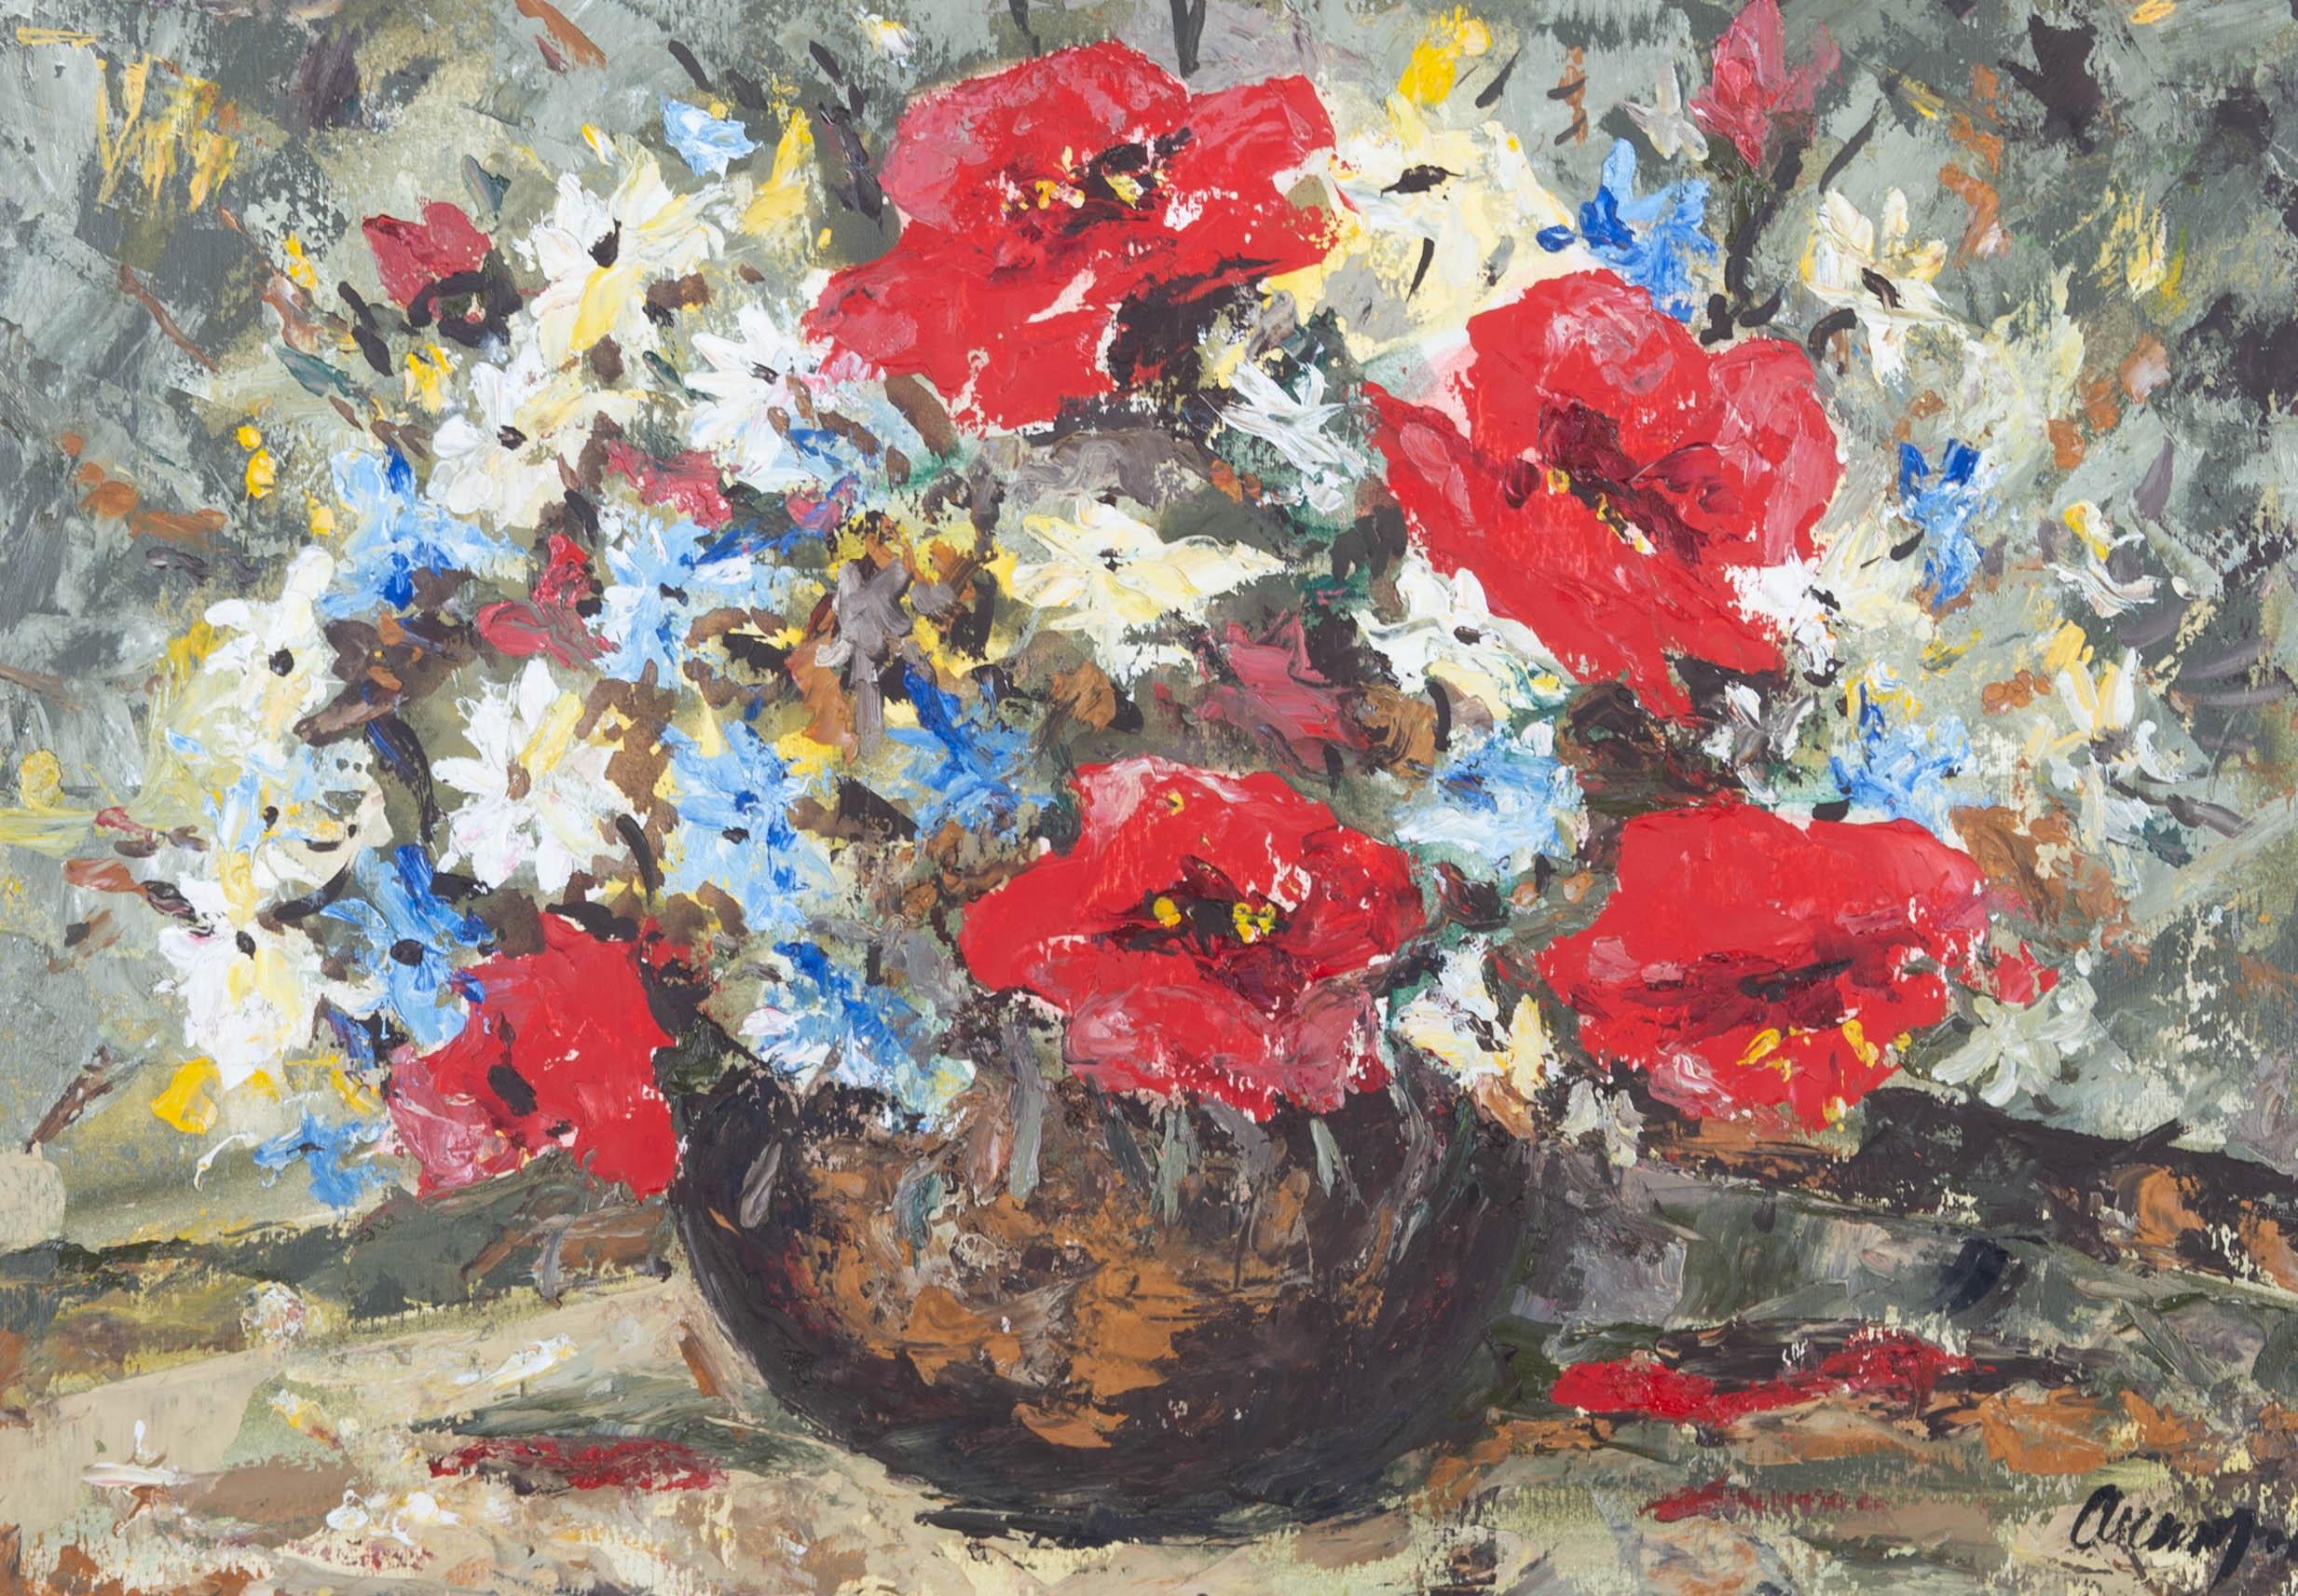 Contemporary Oil - Still Life with Red, Yellow & Blue Flowers - Painting by Unknown